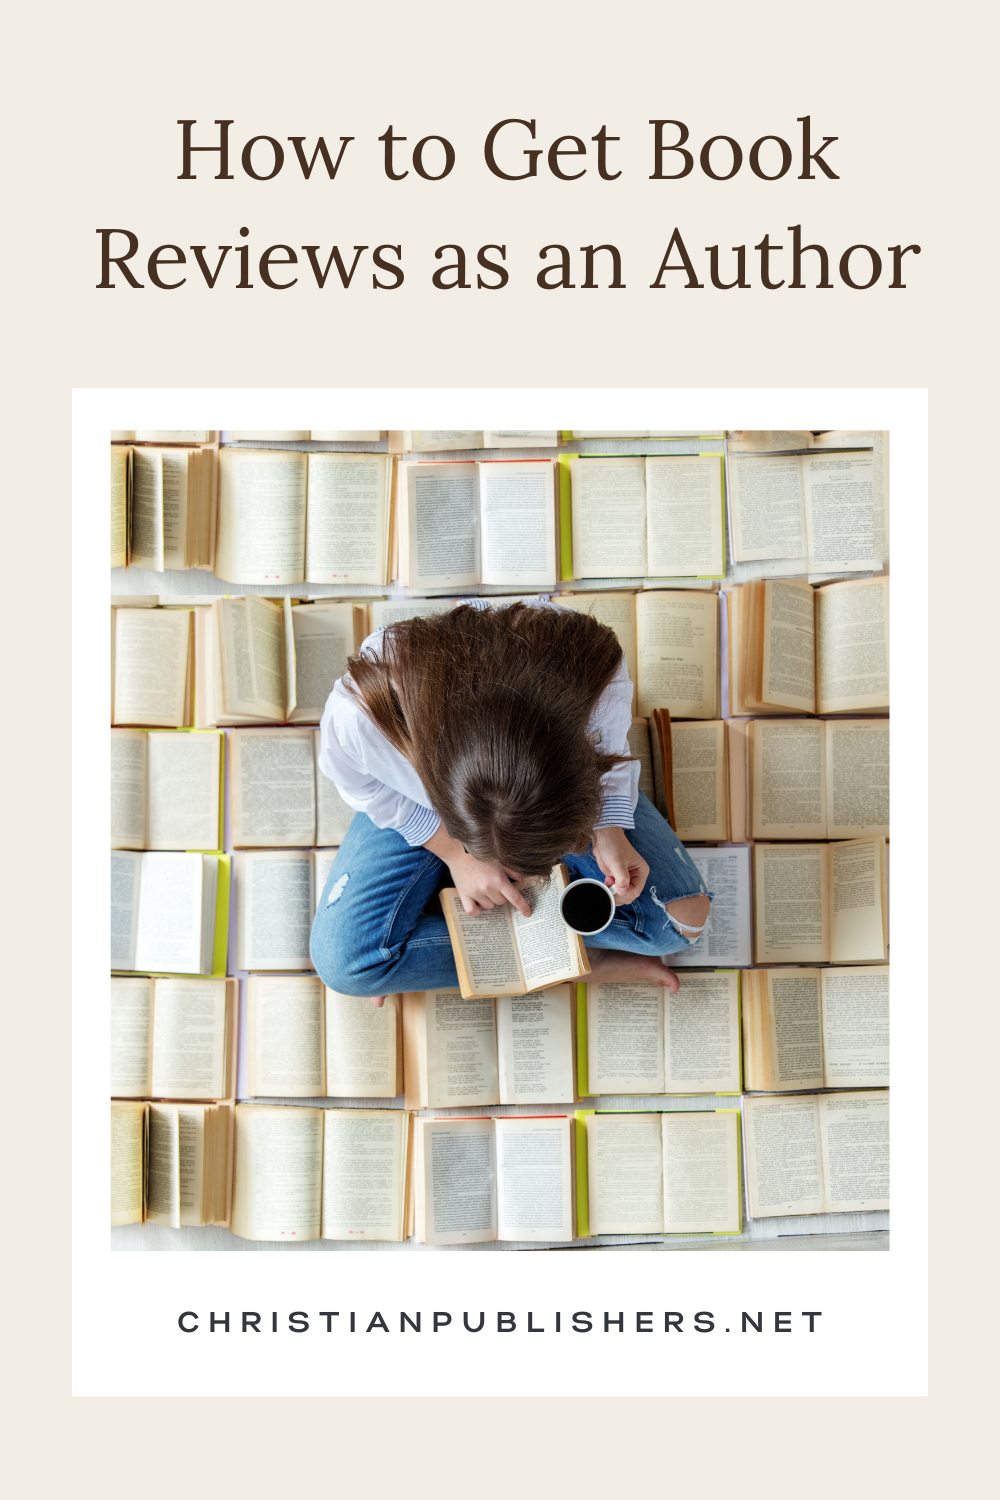 5 Key Tips to Help You Get Book Reviews